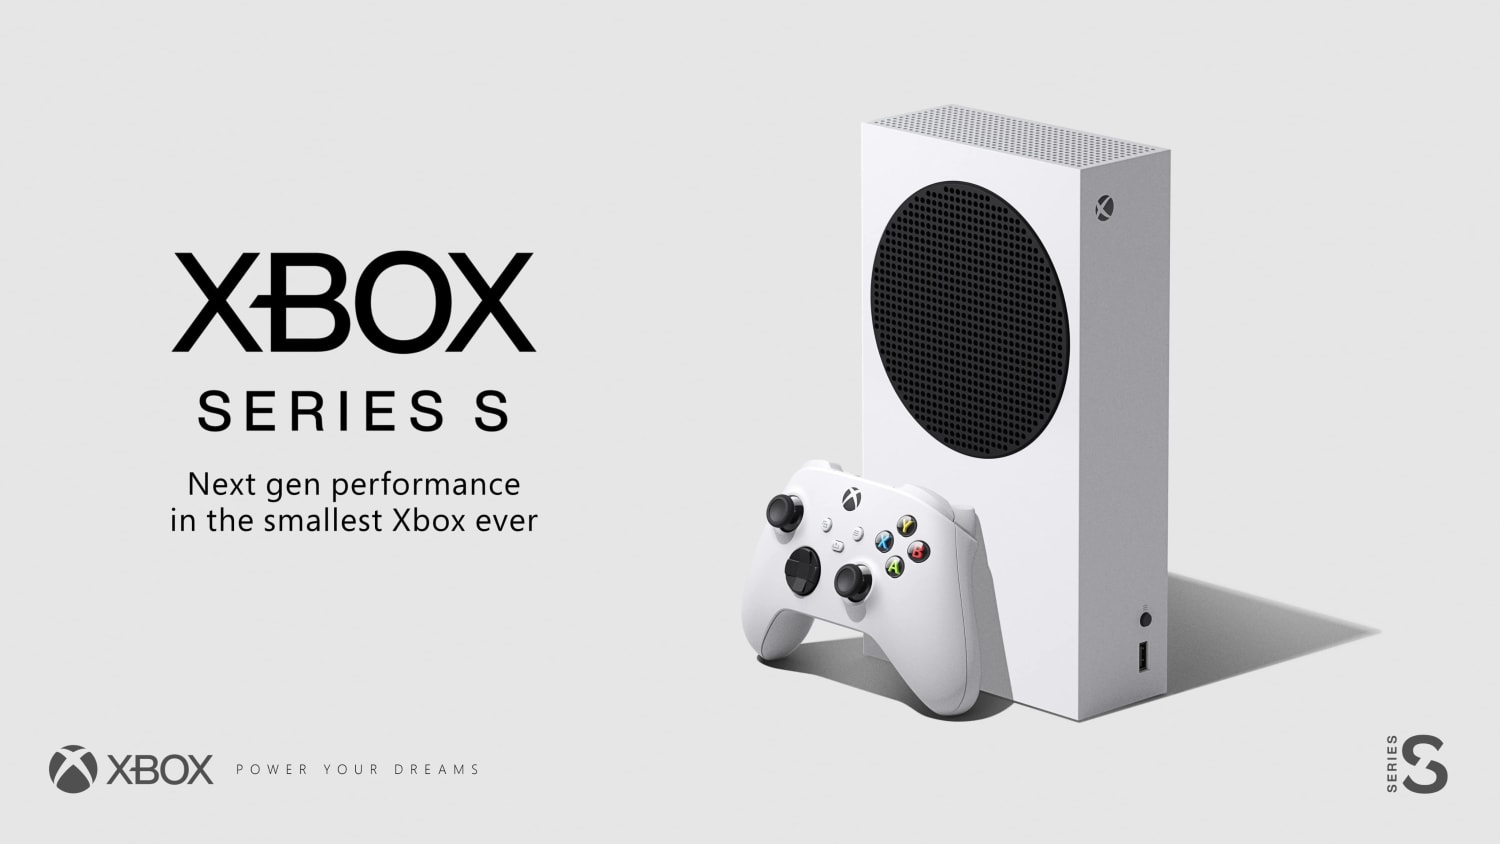 The Xbox Series S Officially Announced, Pricing/Release Date Revealed